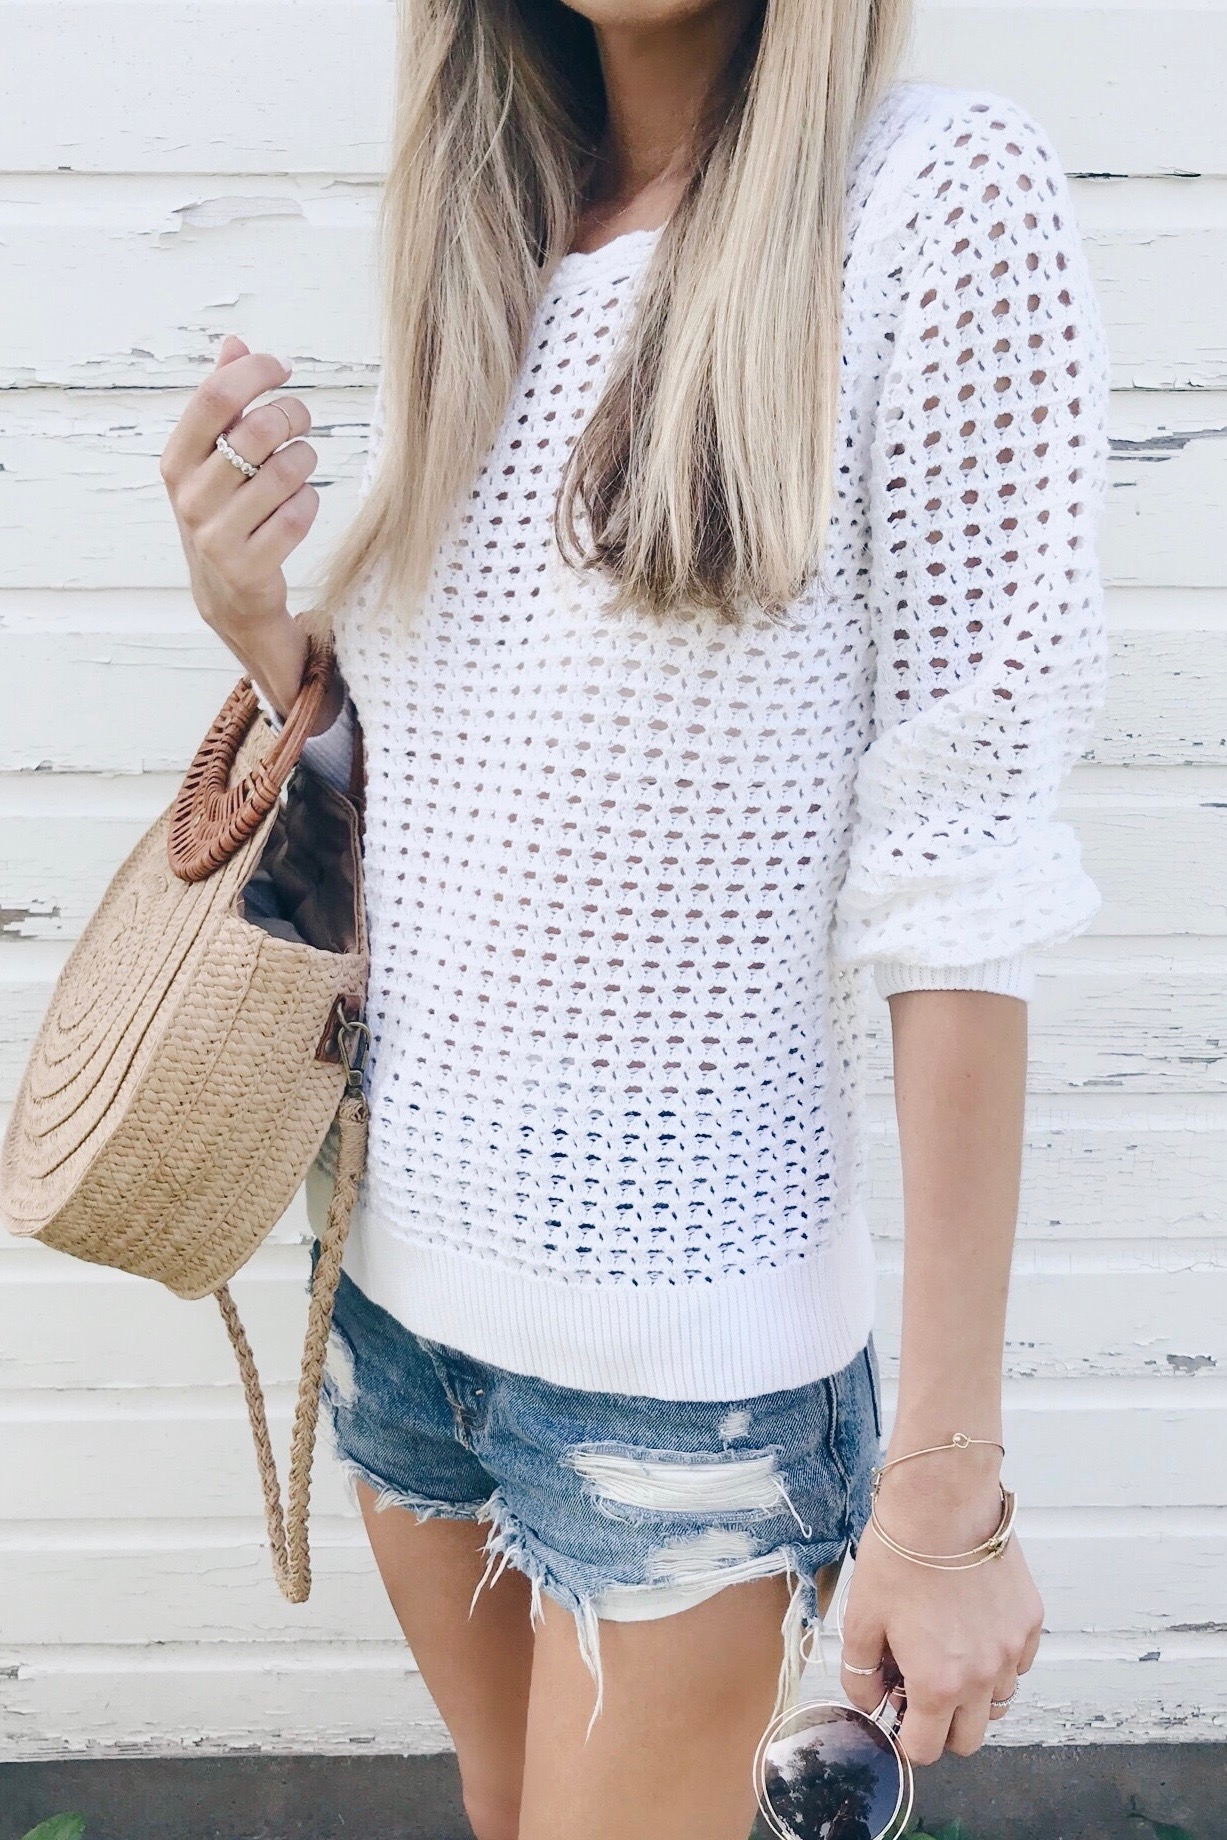 Summer Vacation Outfit Ideas - Crochet Sweater